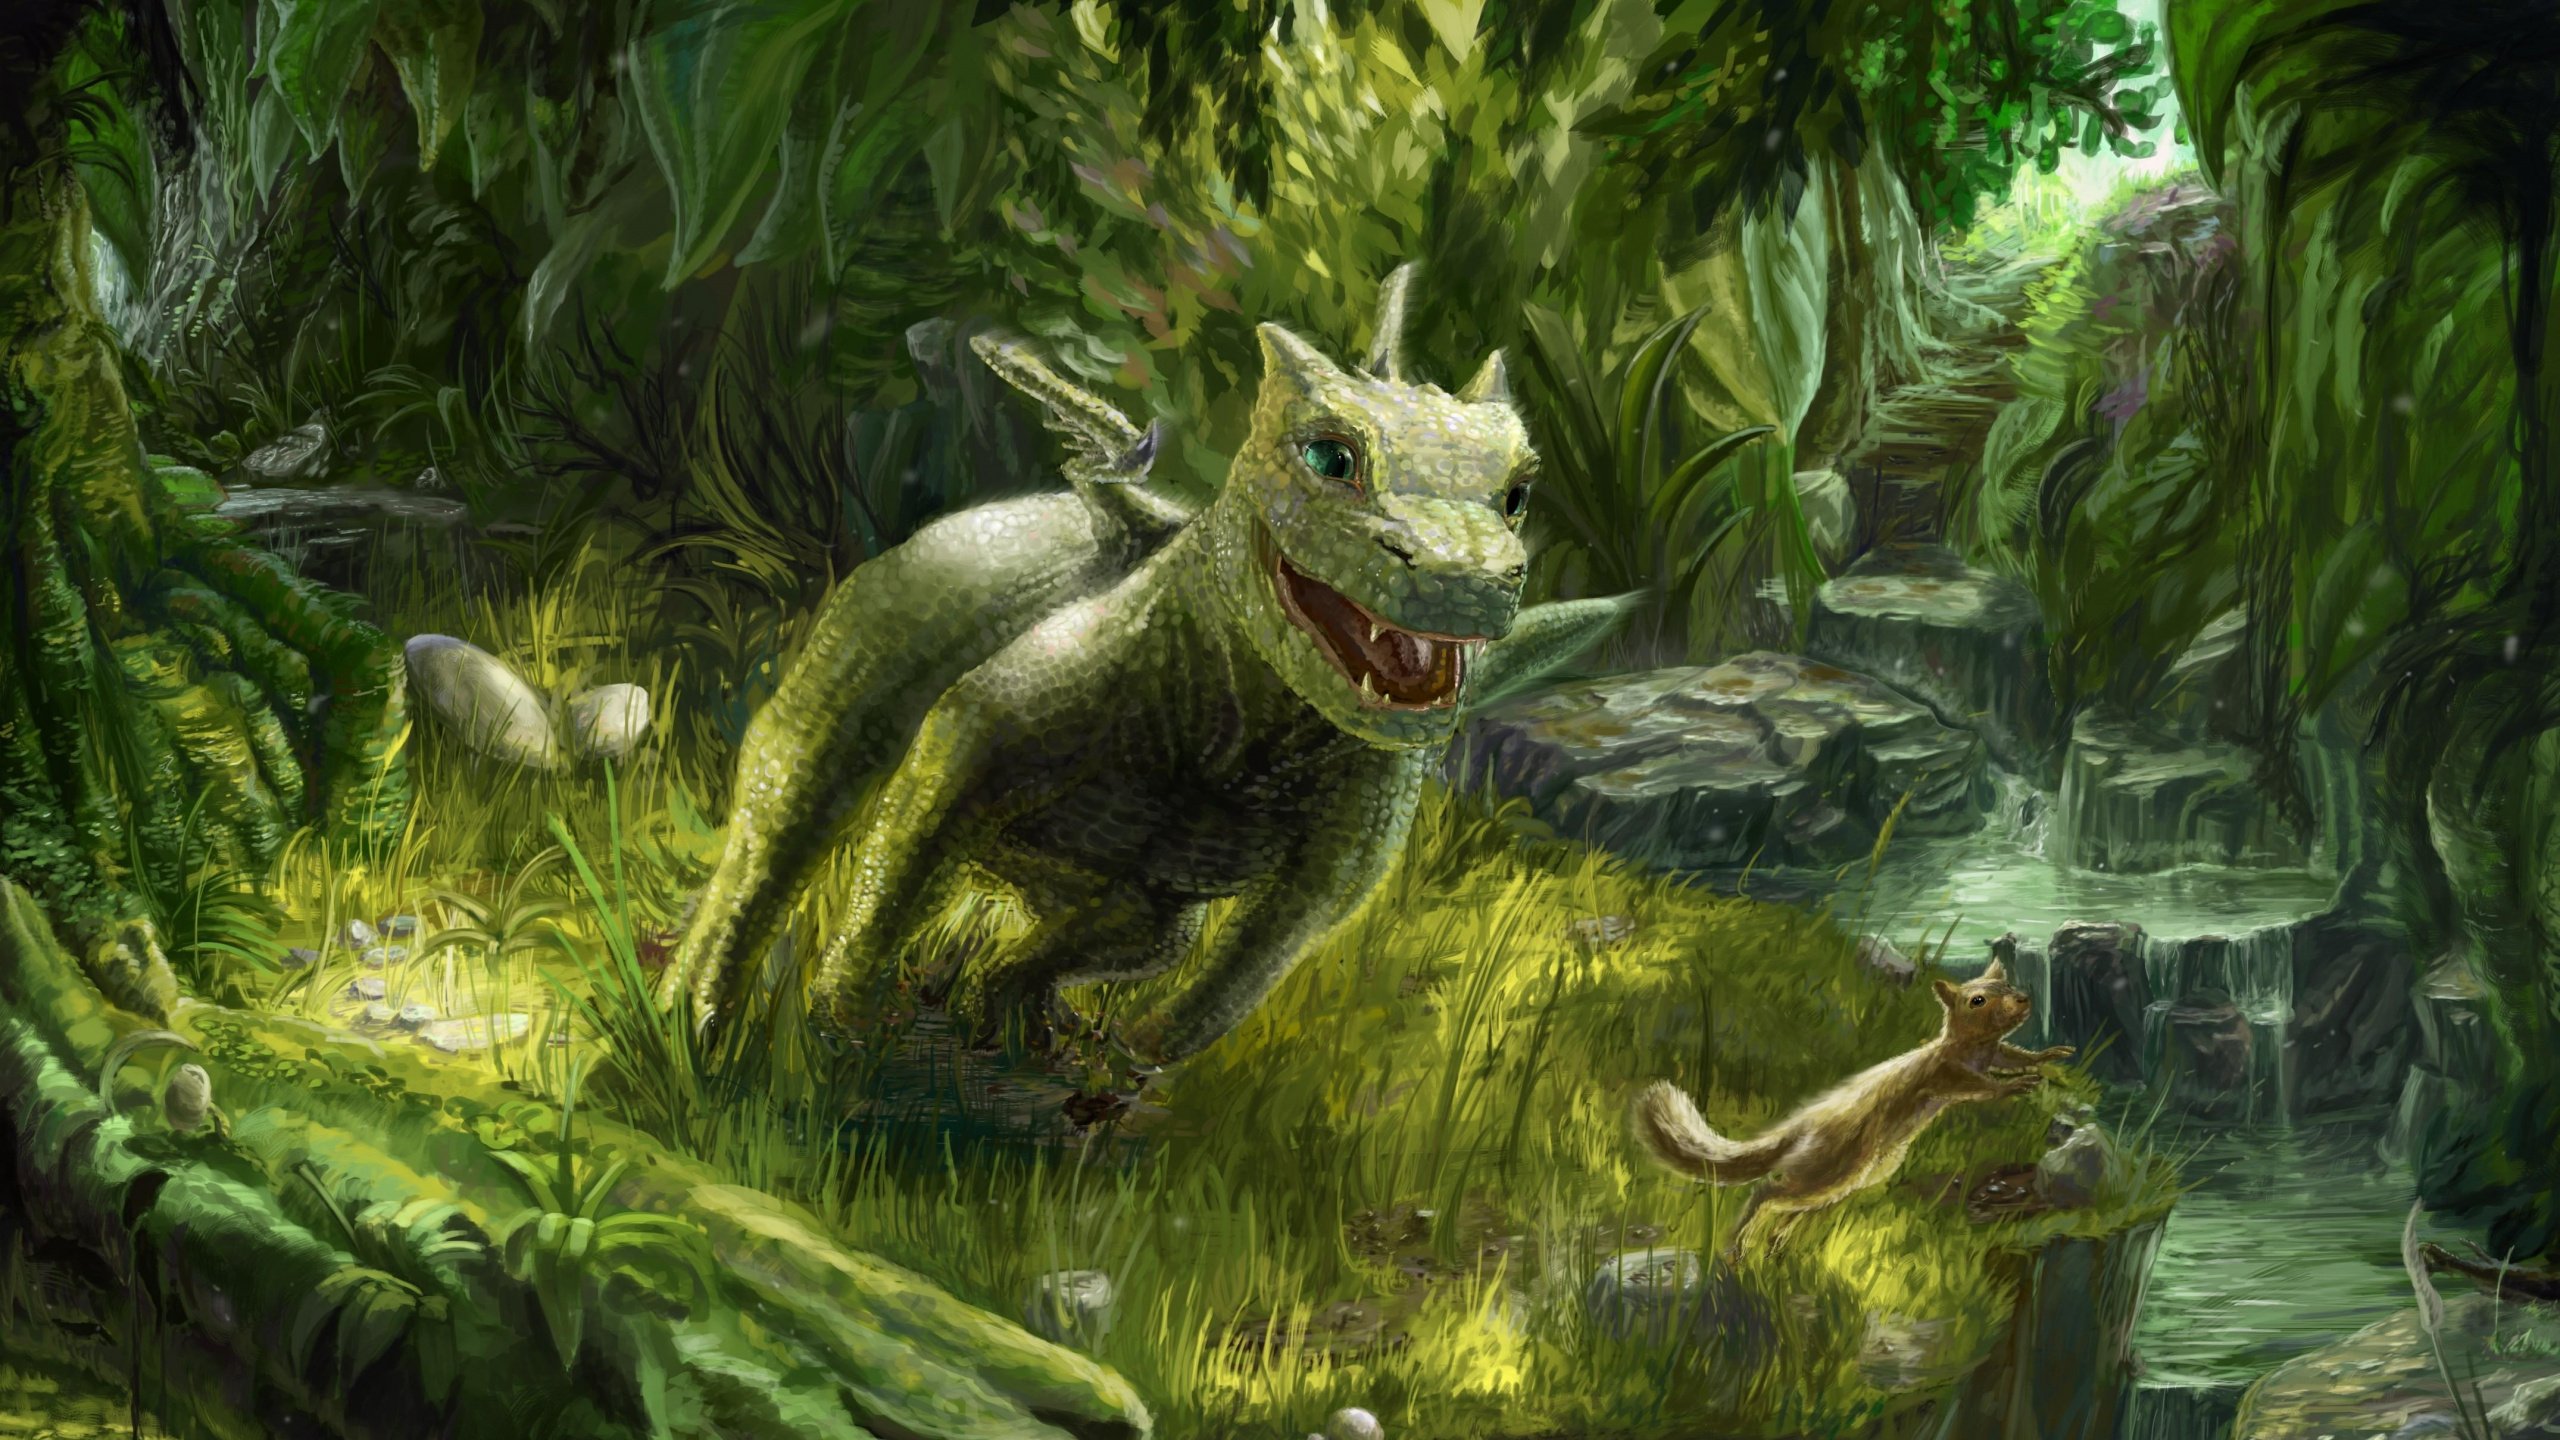 Green and Gray Dragon on Green Grass Painting. Wallpaper in 2560x1440 Resolution